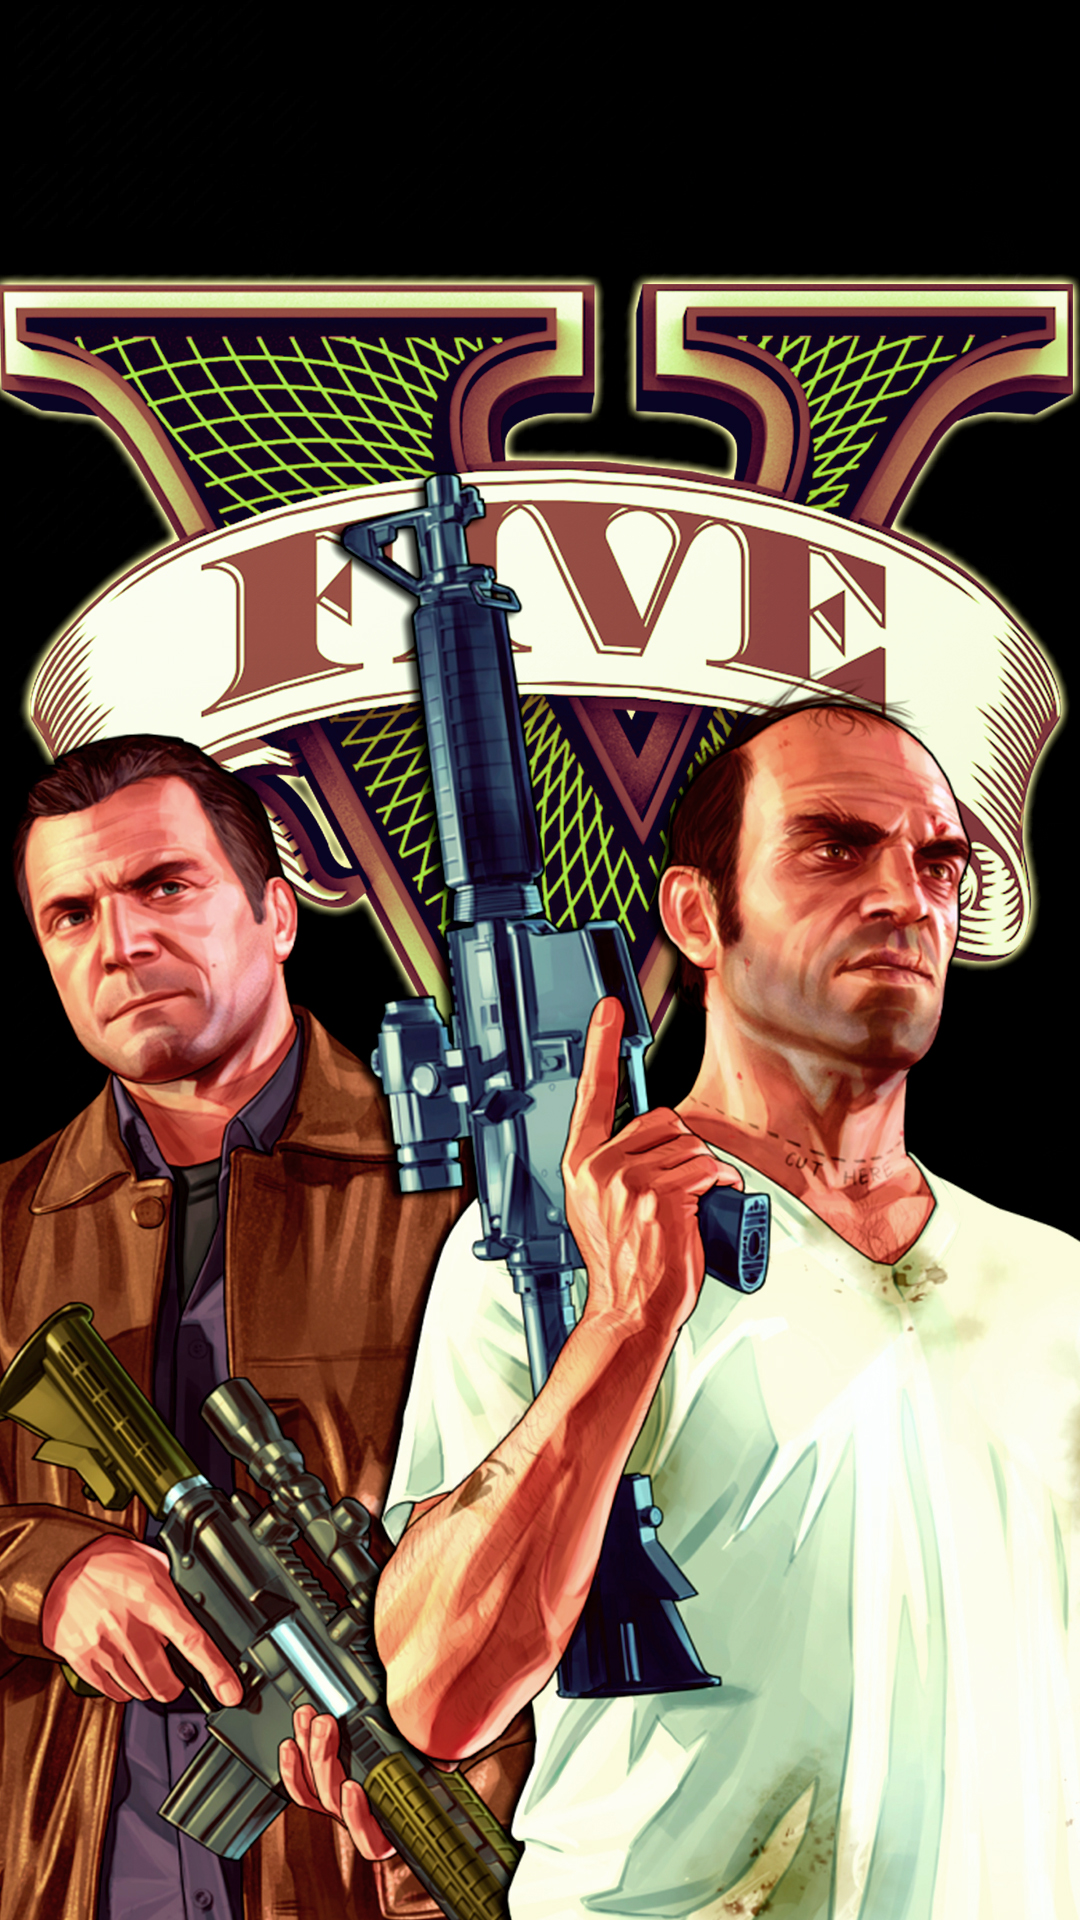 Gta 5 wallpapers for phone фото 58